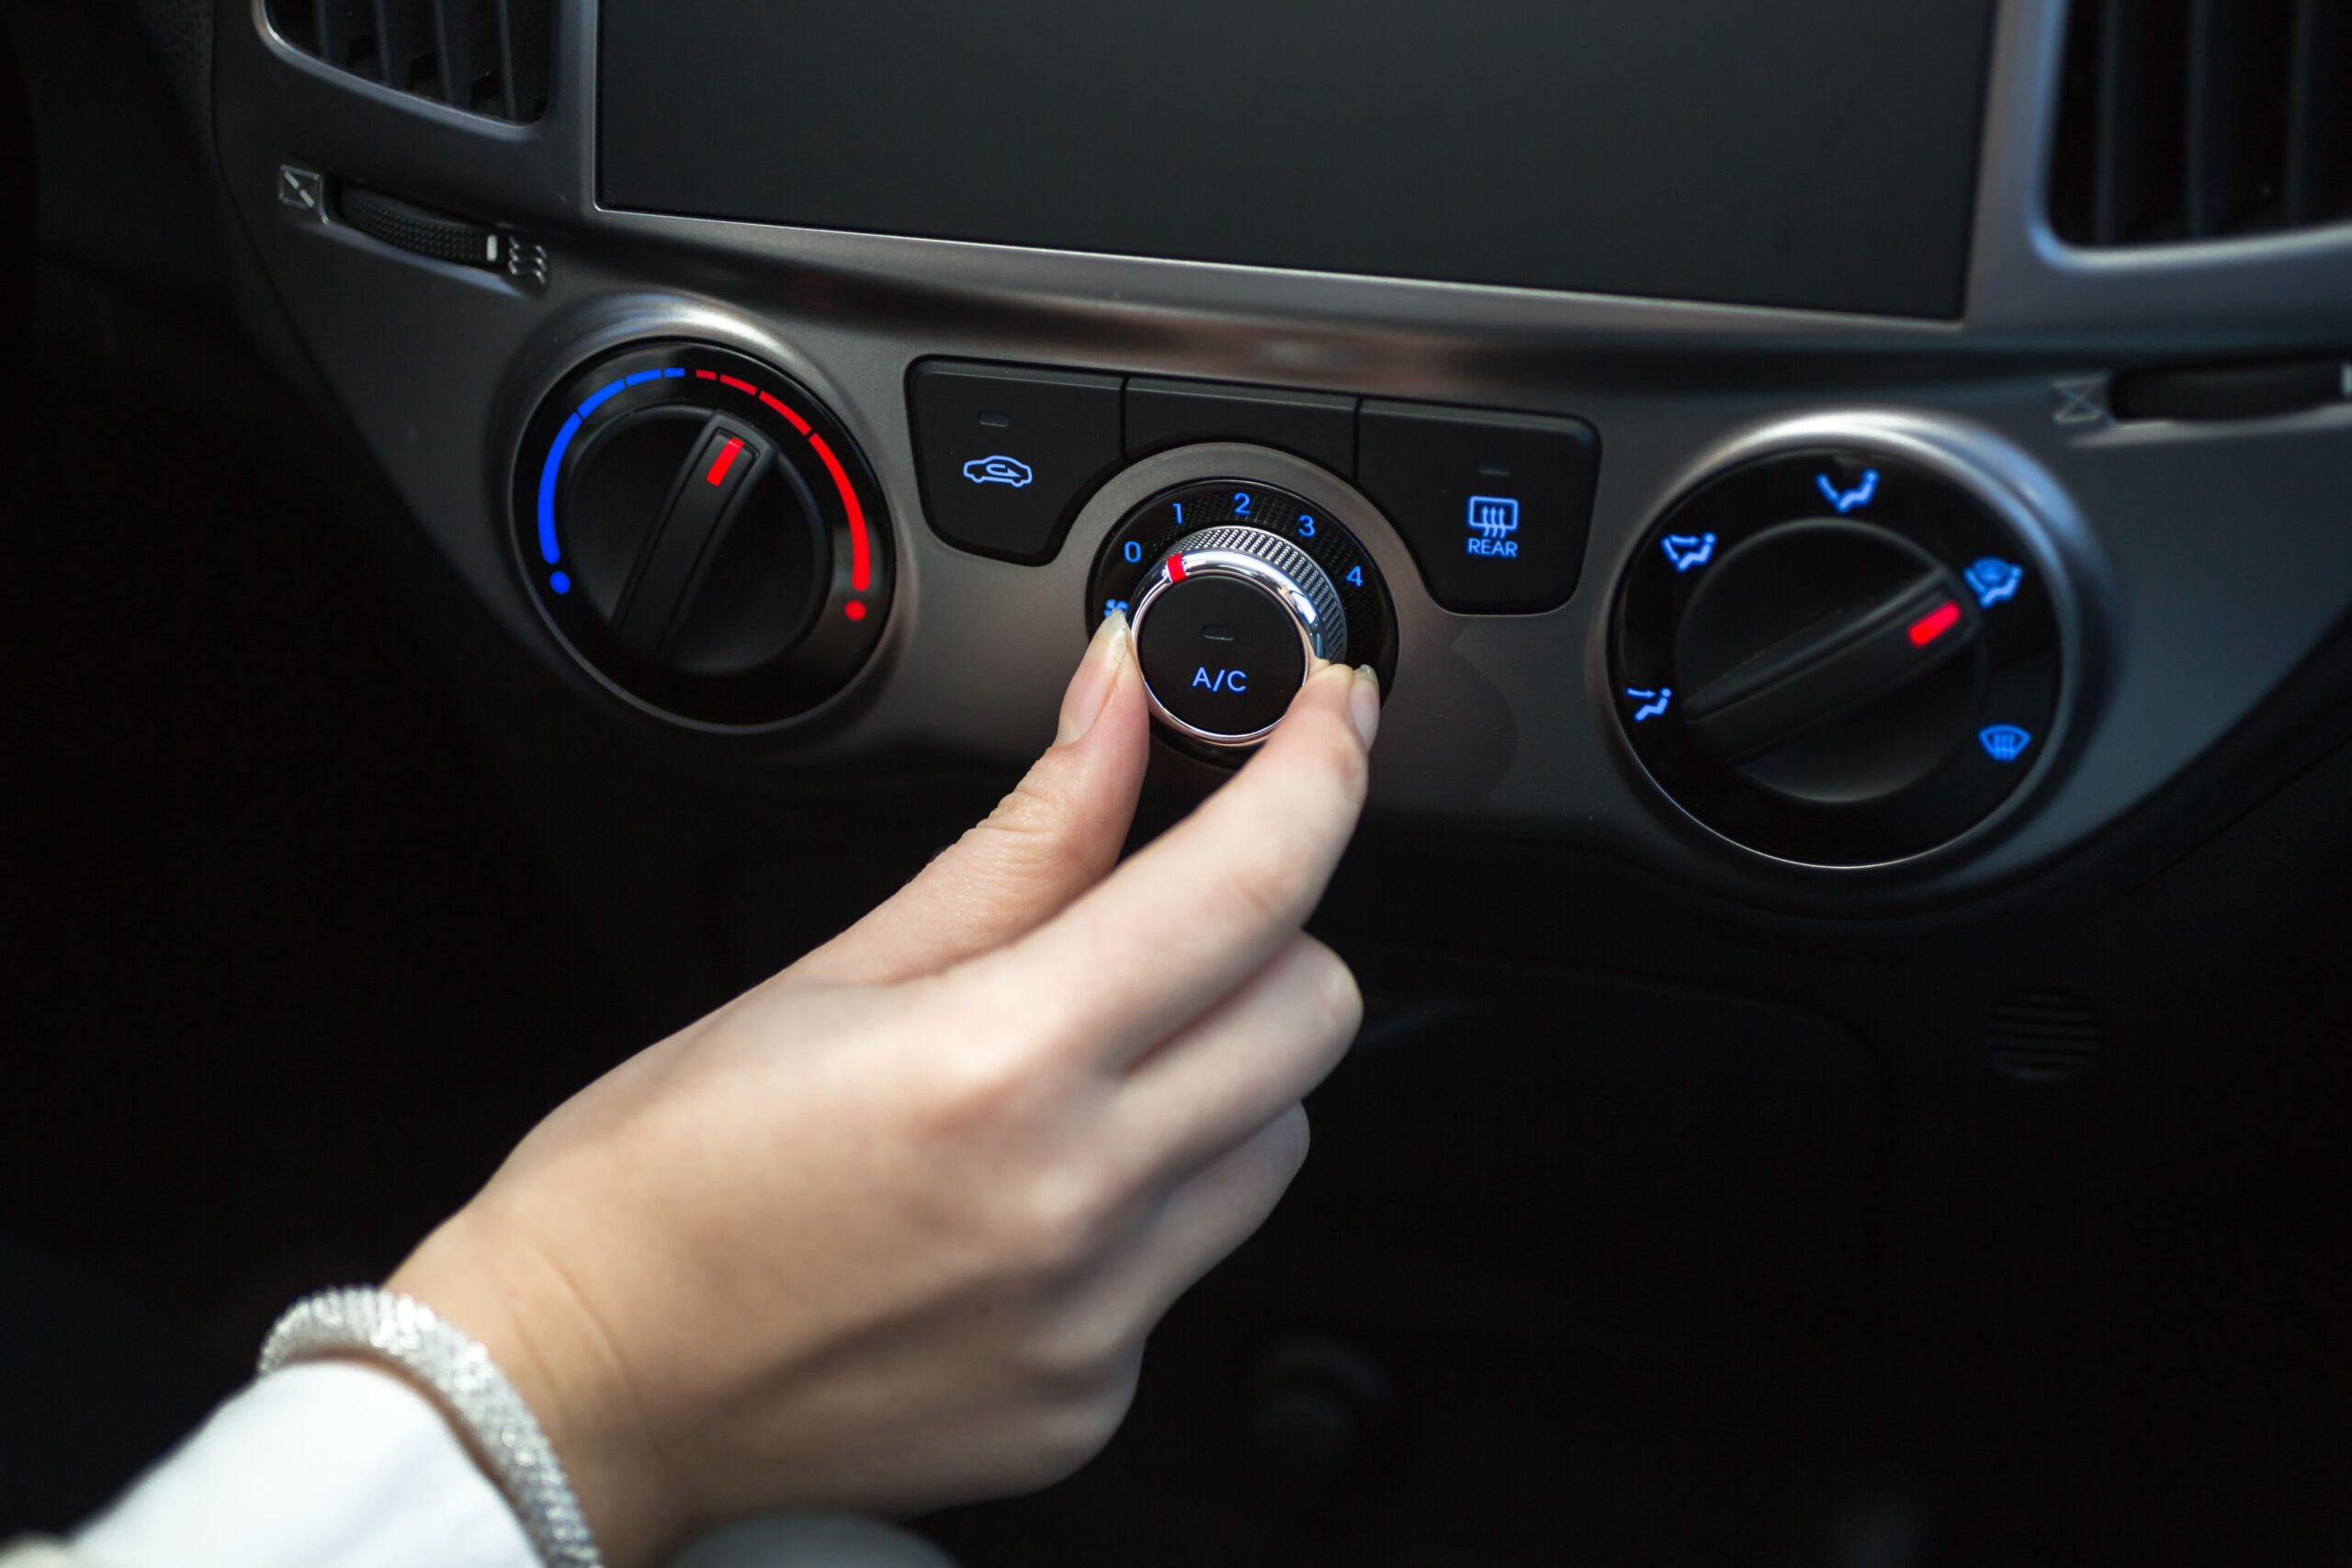 Warning Signs That Your Car’s A/C System Needs Service